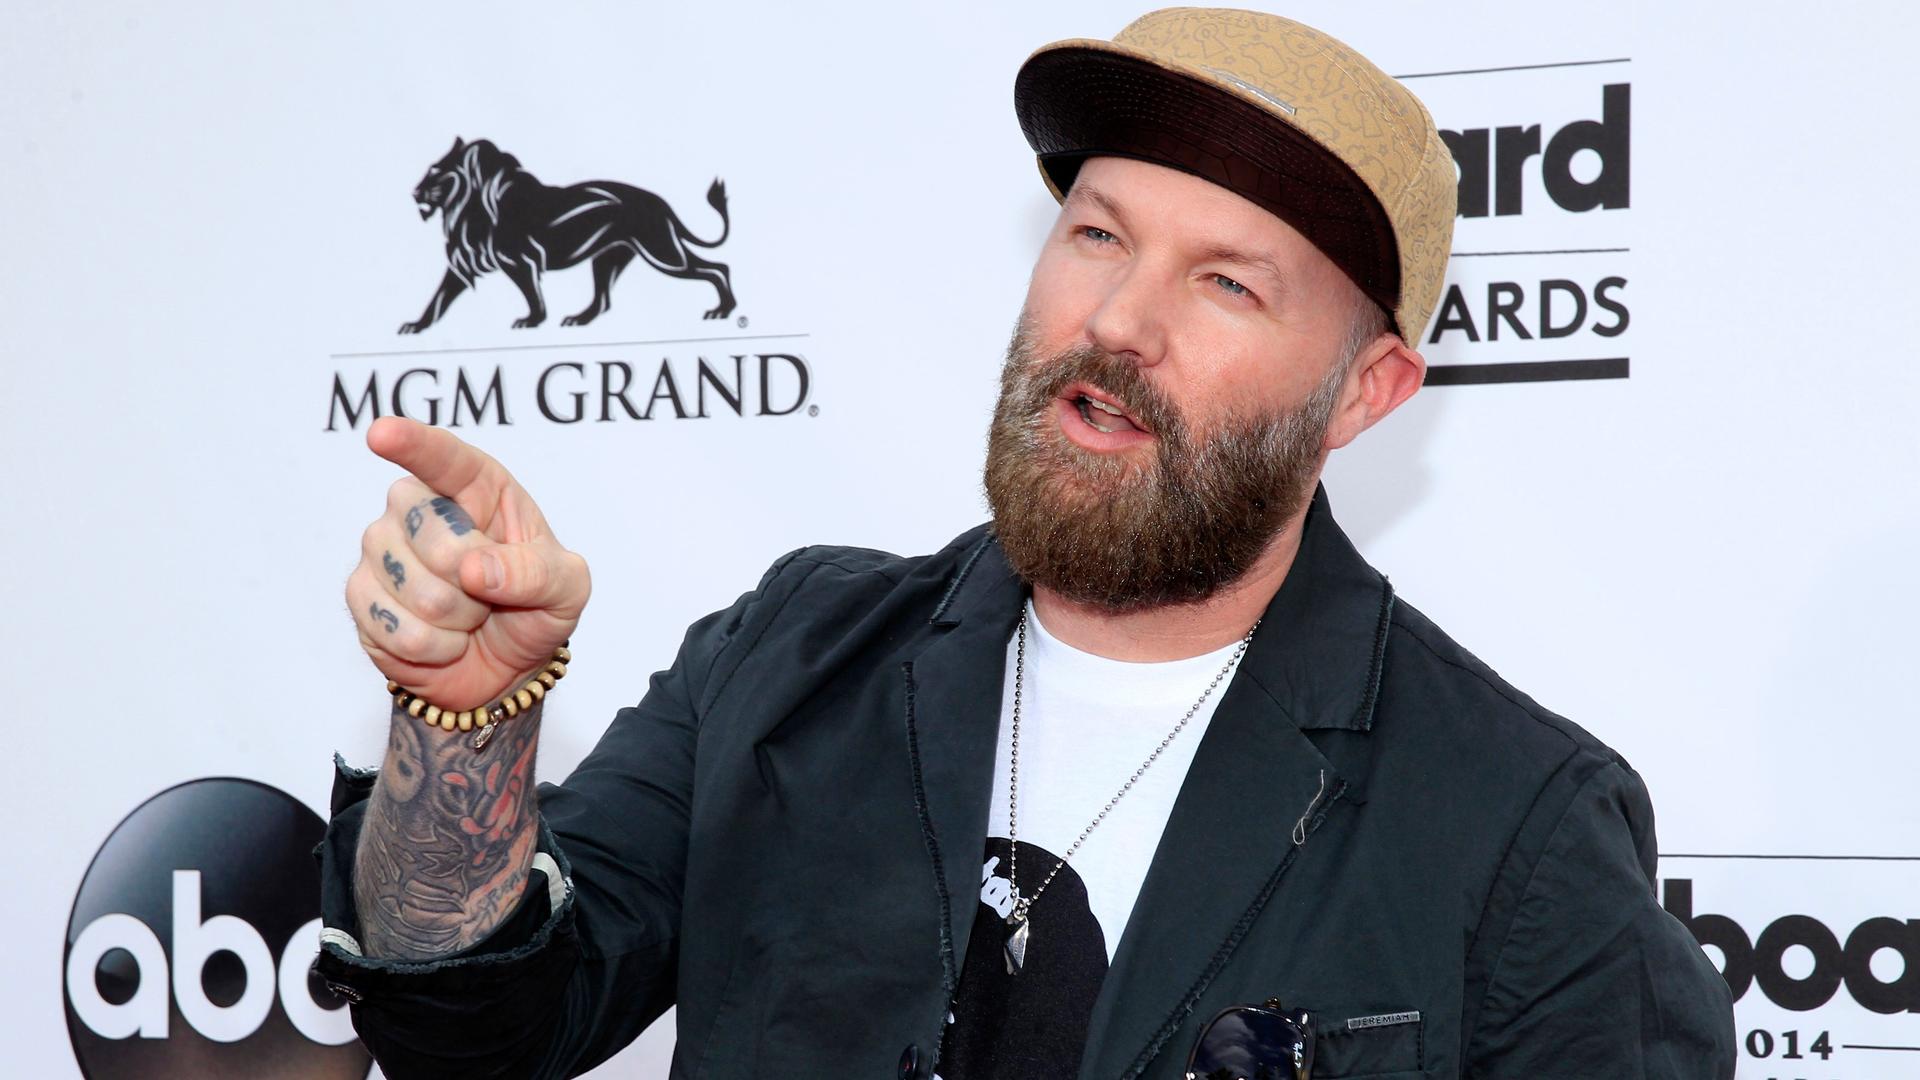 Fred Durst at the 2014 Billboard Music Awards in Las Vegas, Nevada.